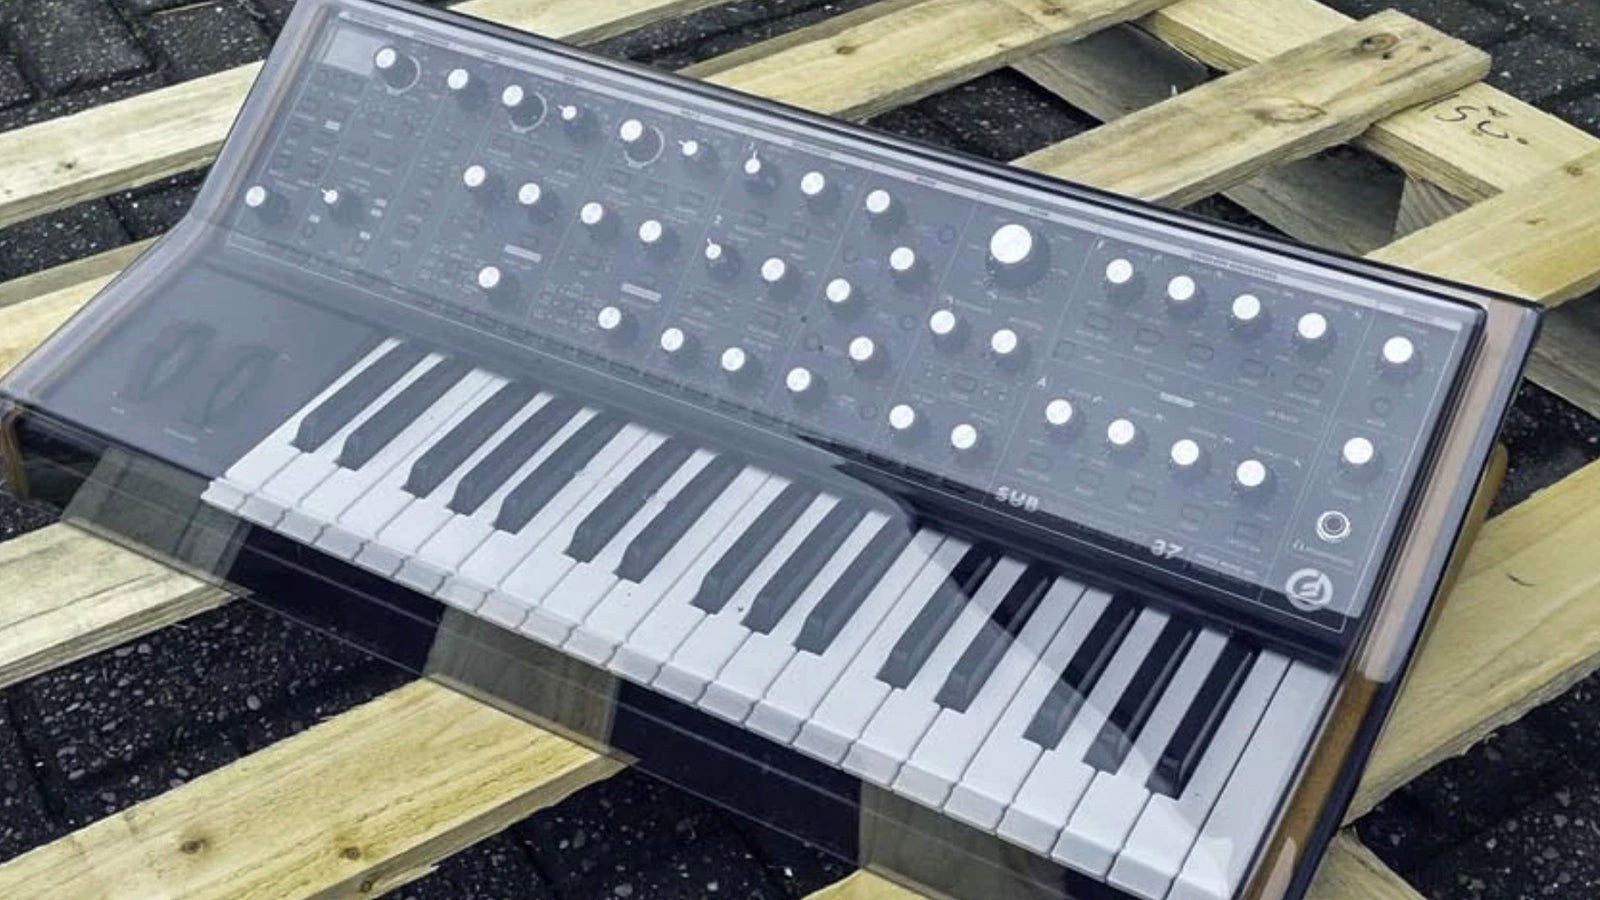 A Decksaver on a Moog Subsequent 37 resting on a wooden pallet